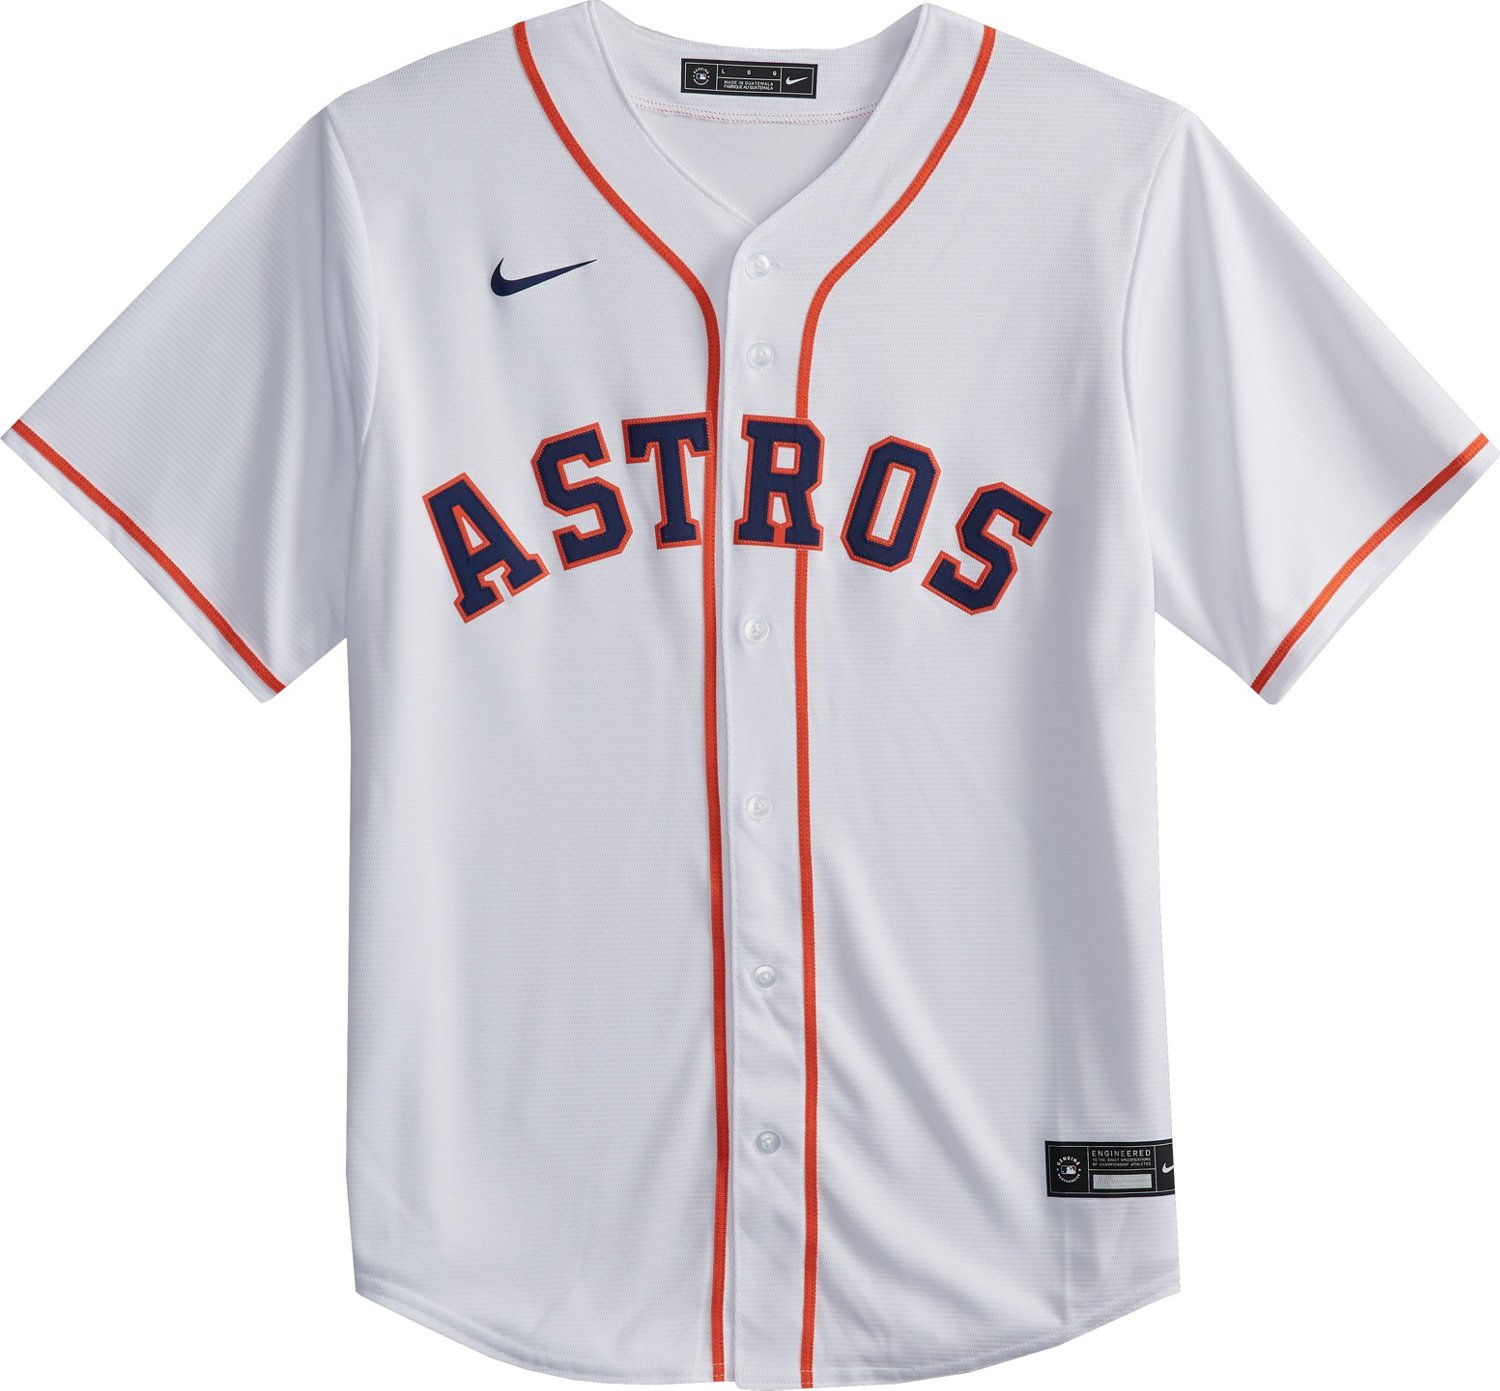 houston astros jersey cheap, Off 77%